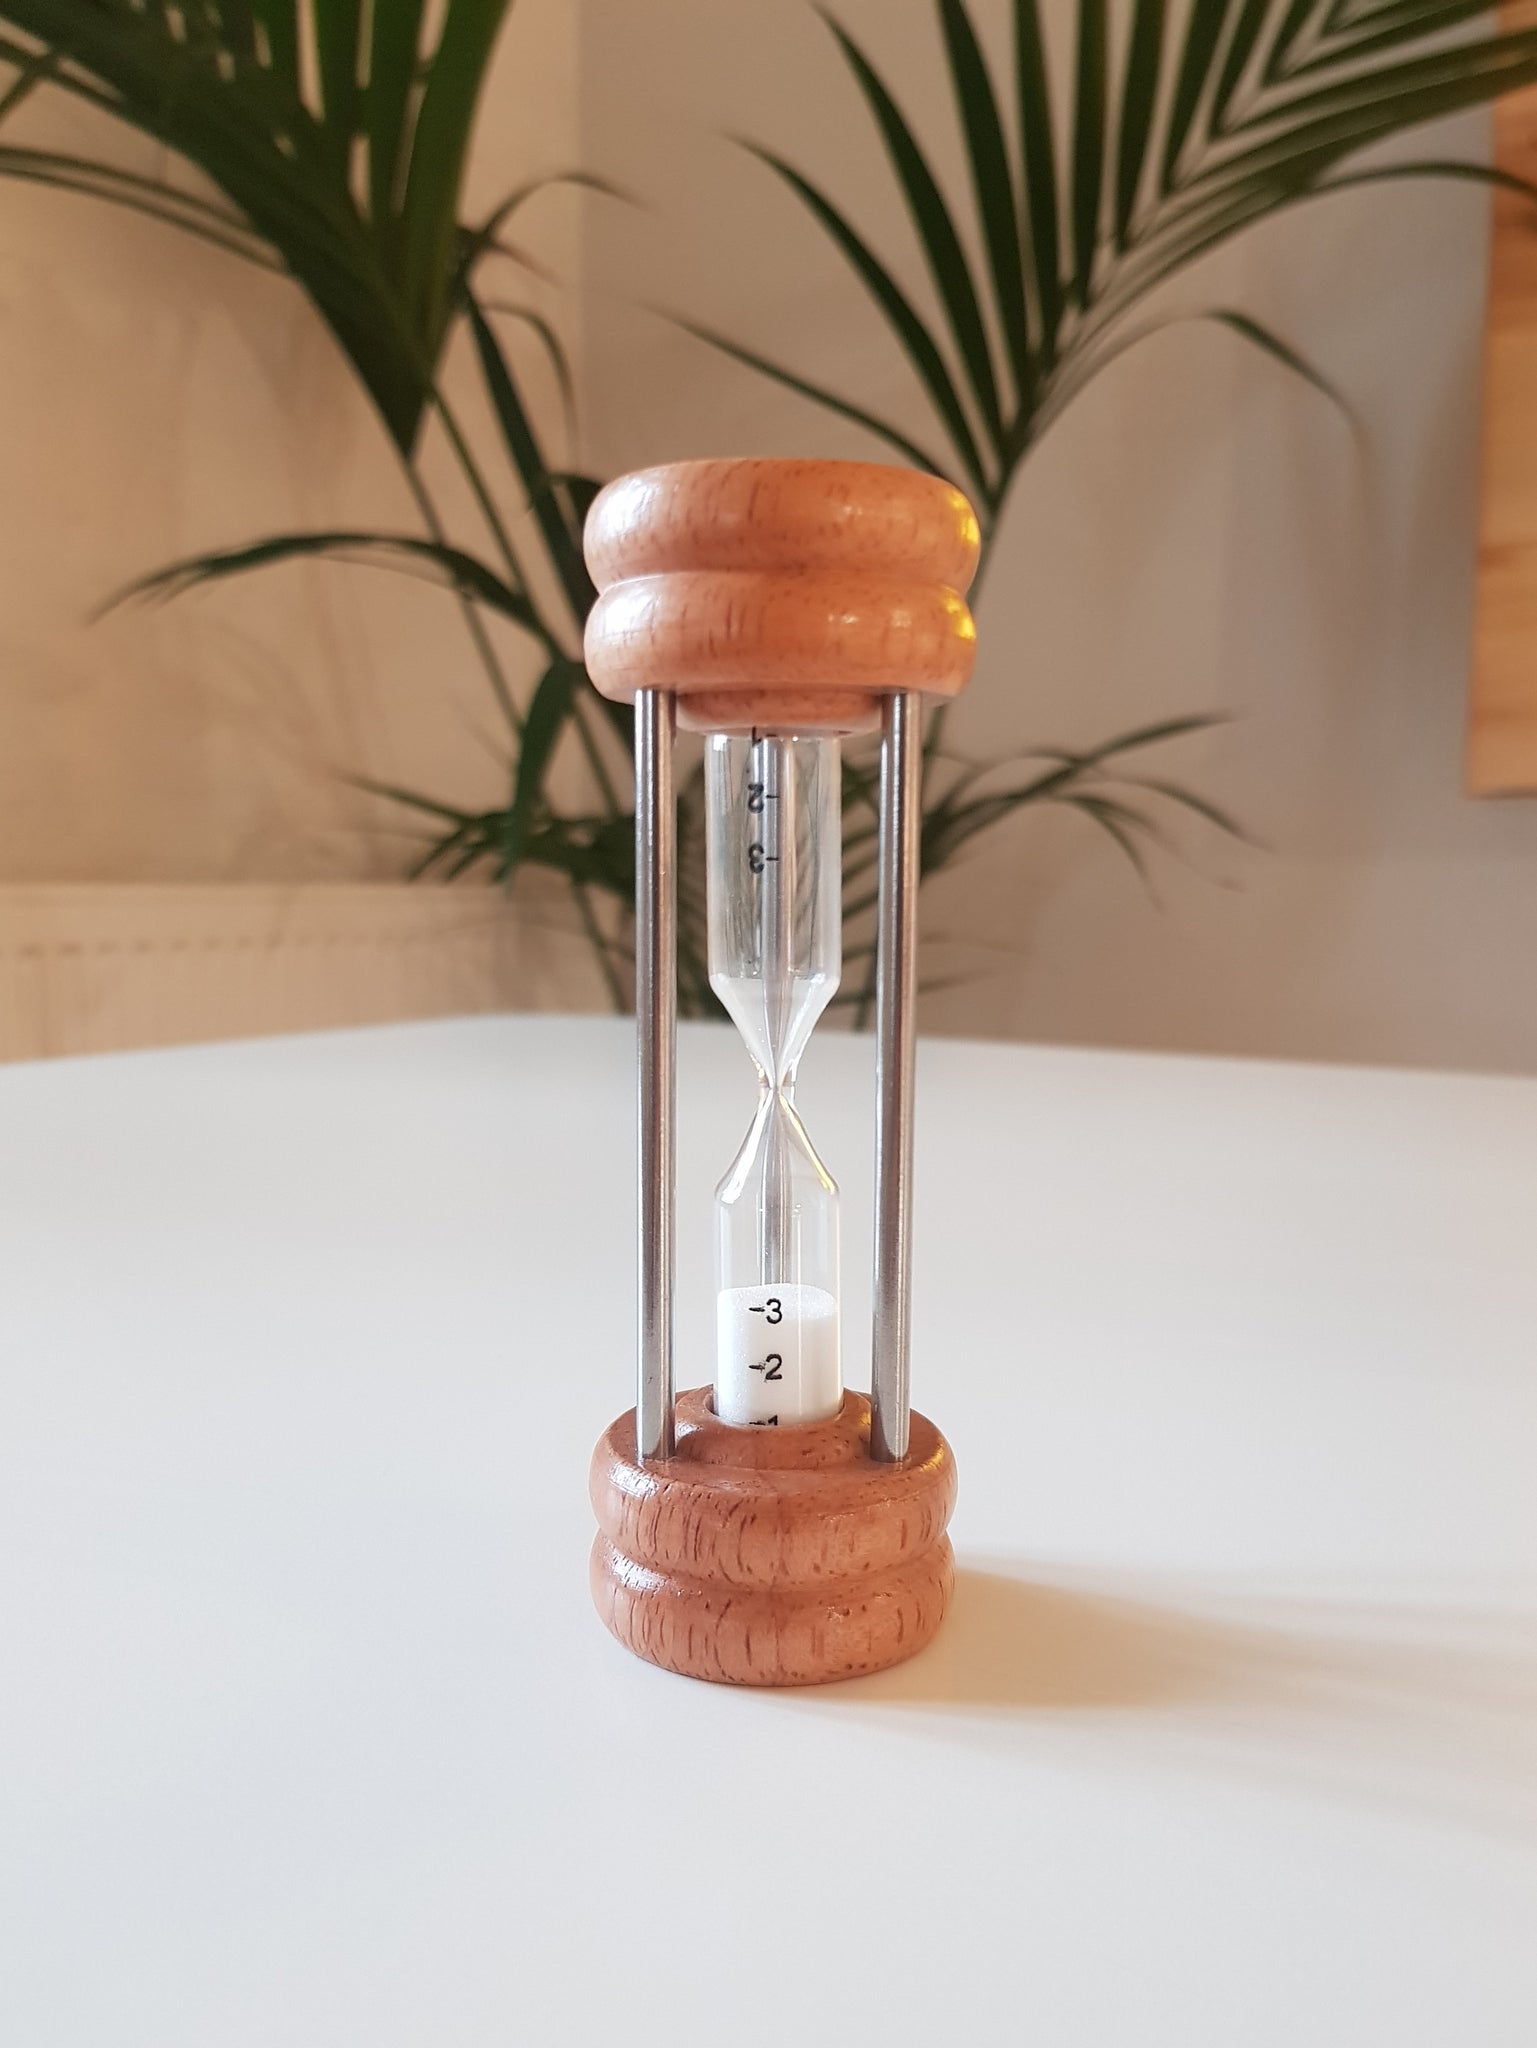 Dexam hourglass with timer